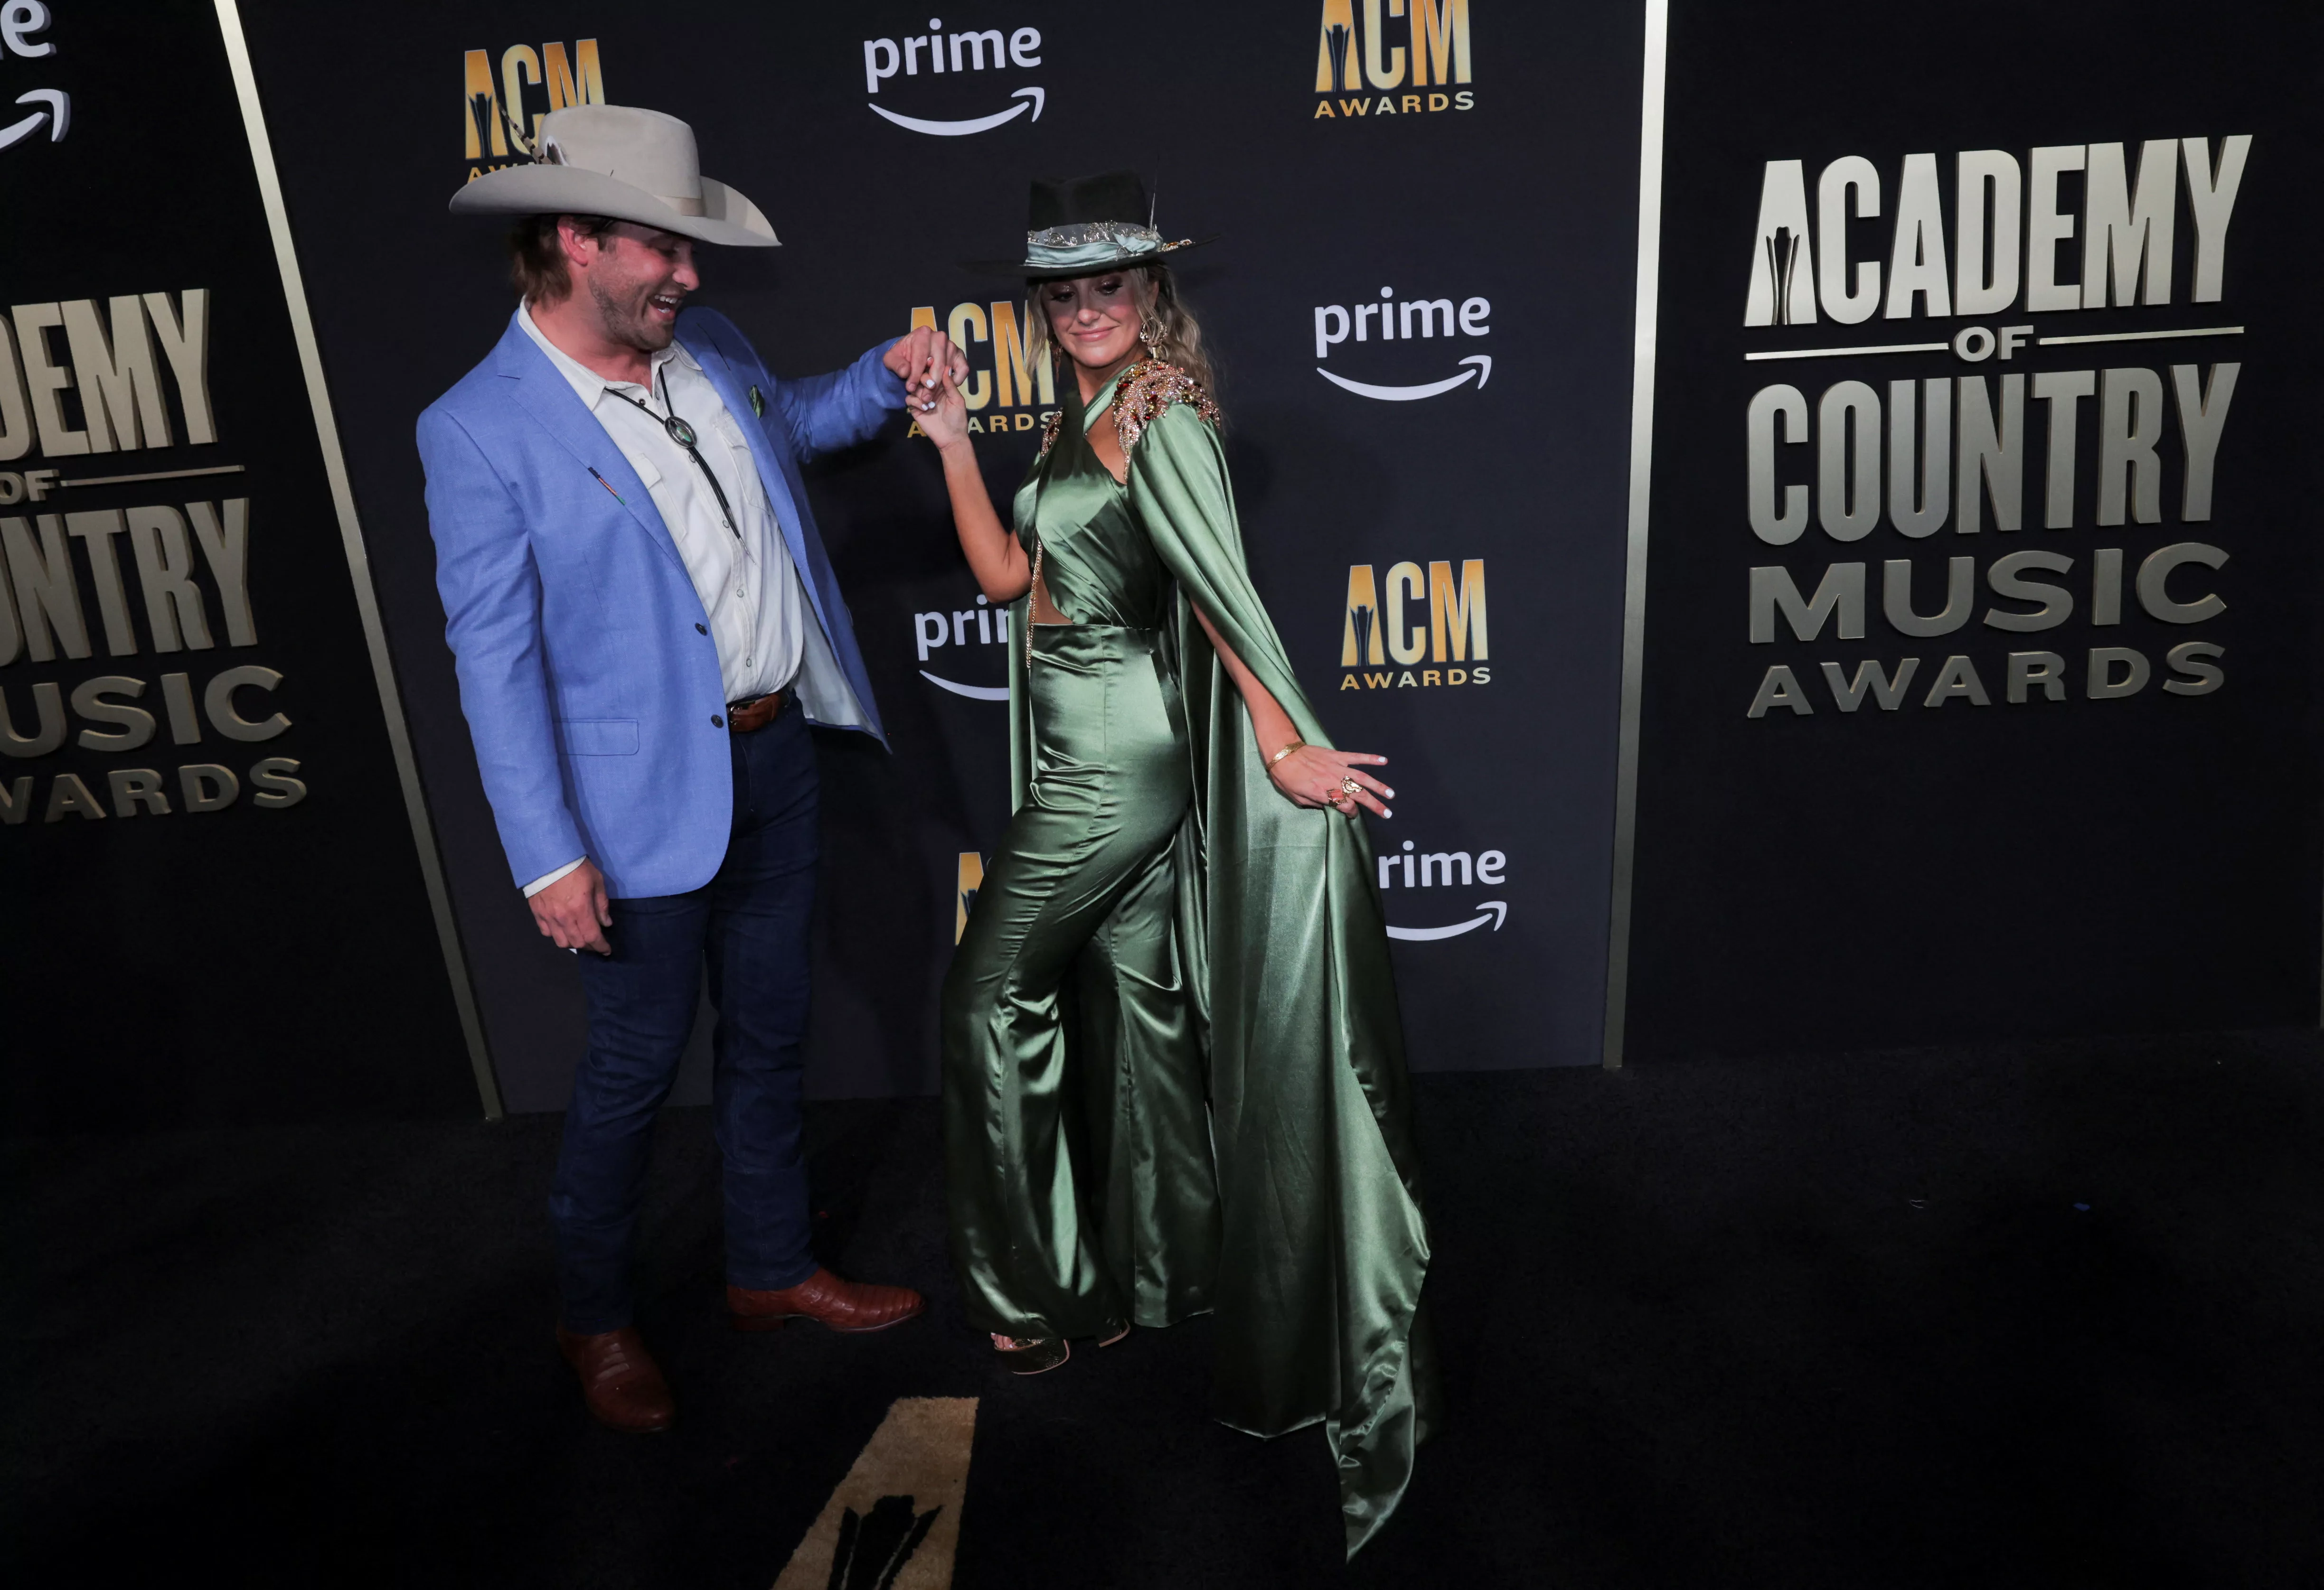 58th-academy-of-country-music-acm-awards-in-frisco-69